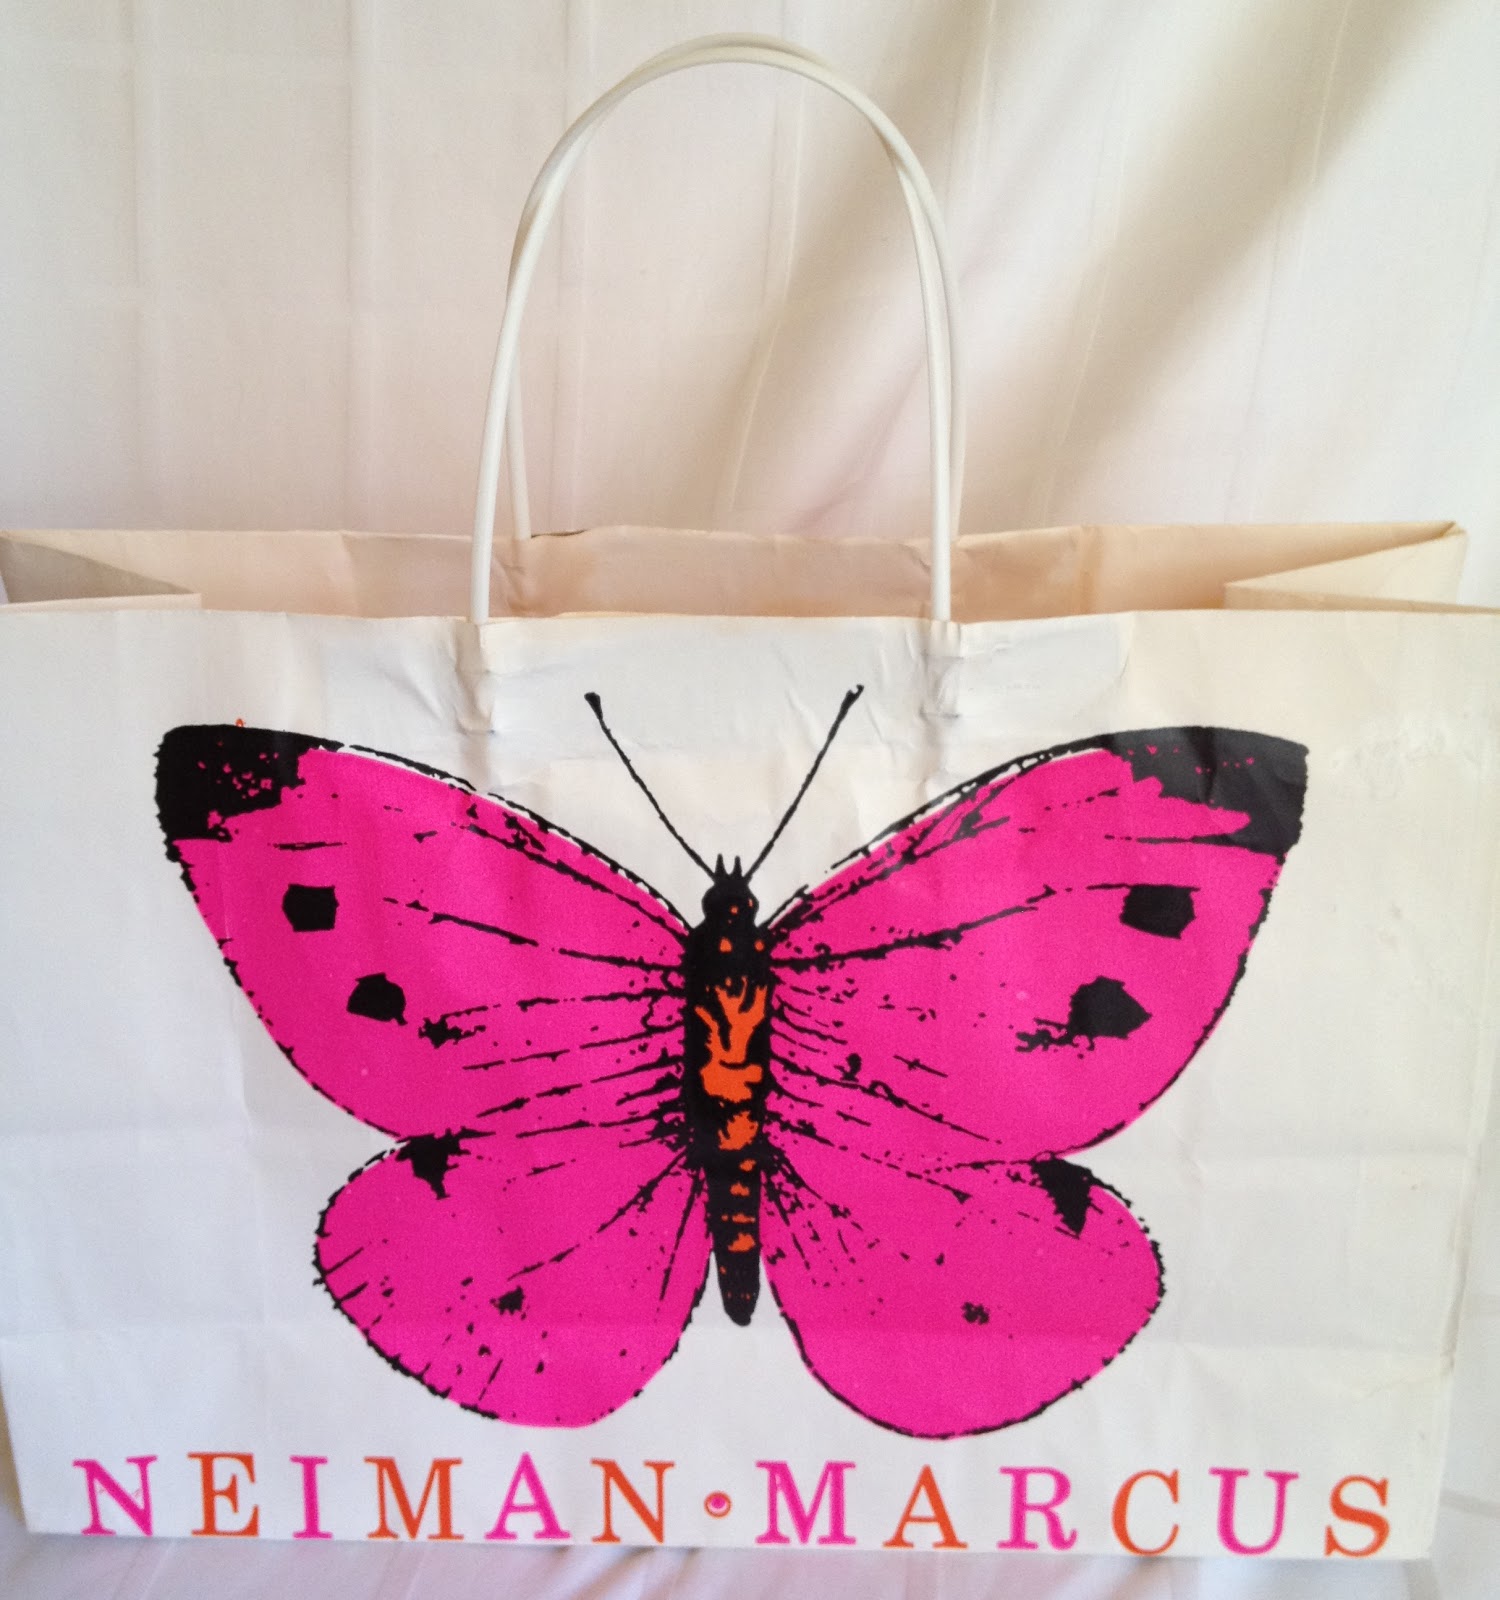 Neiman Marcus - Pink Tote Bag Unknown